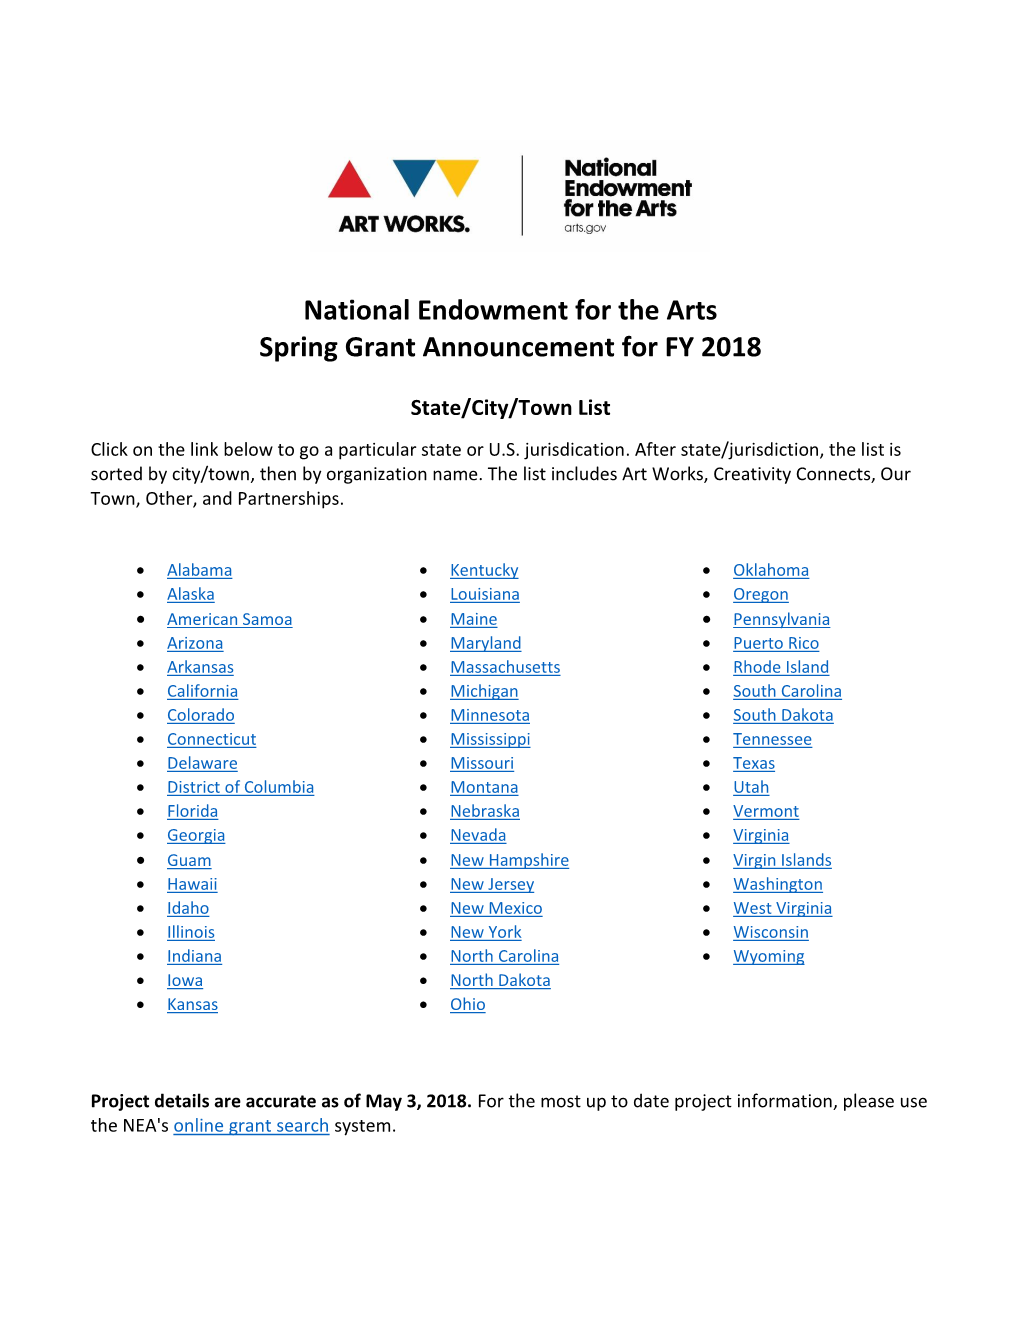 National Endowment for the Arts Spring Grant Announcement for FY 2018